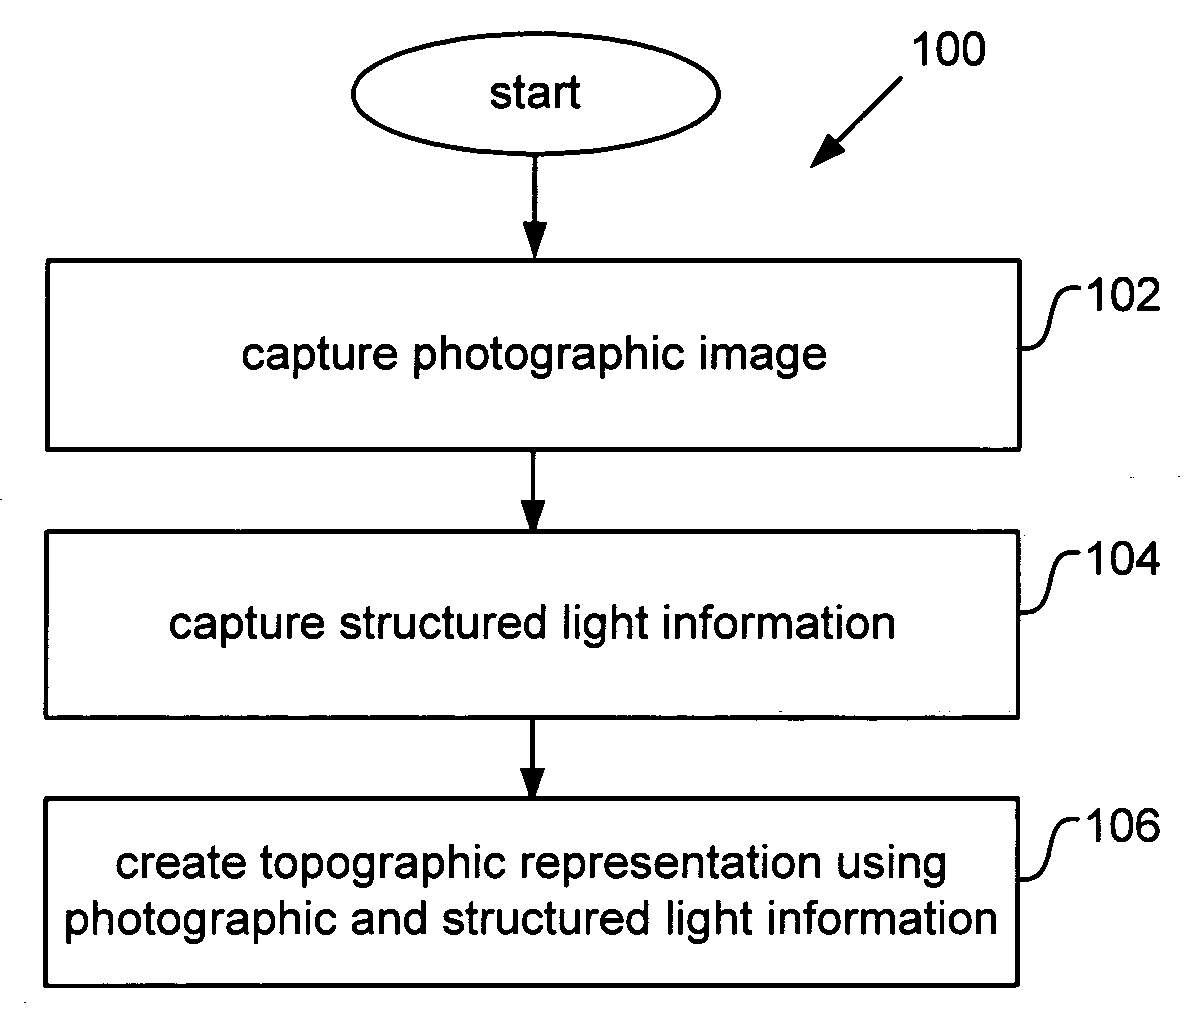 Surface contruction using combined photographic and structured light information